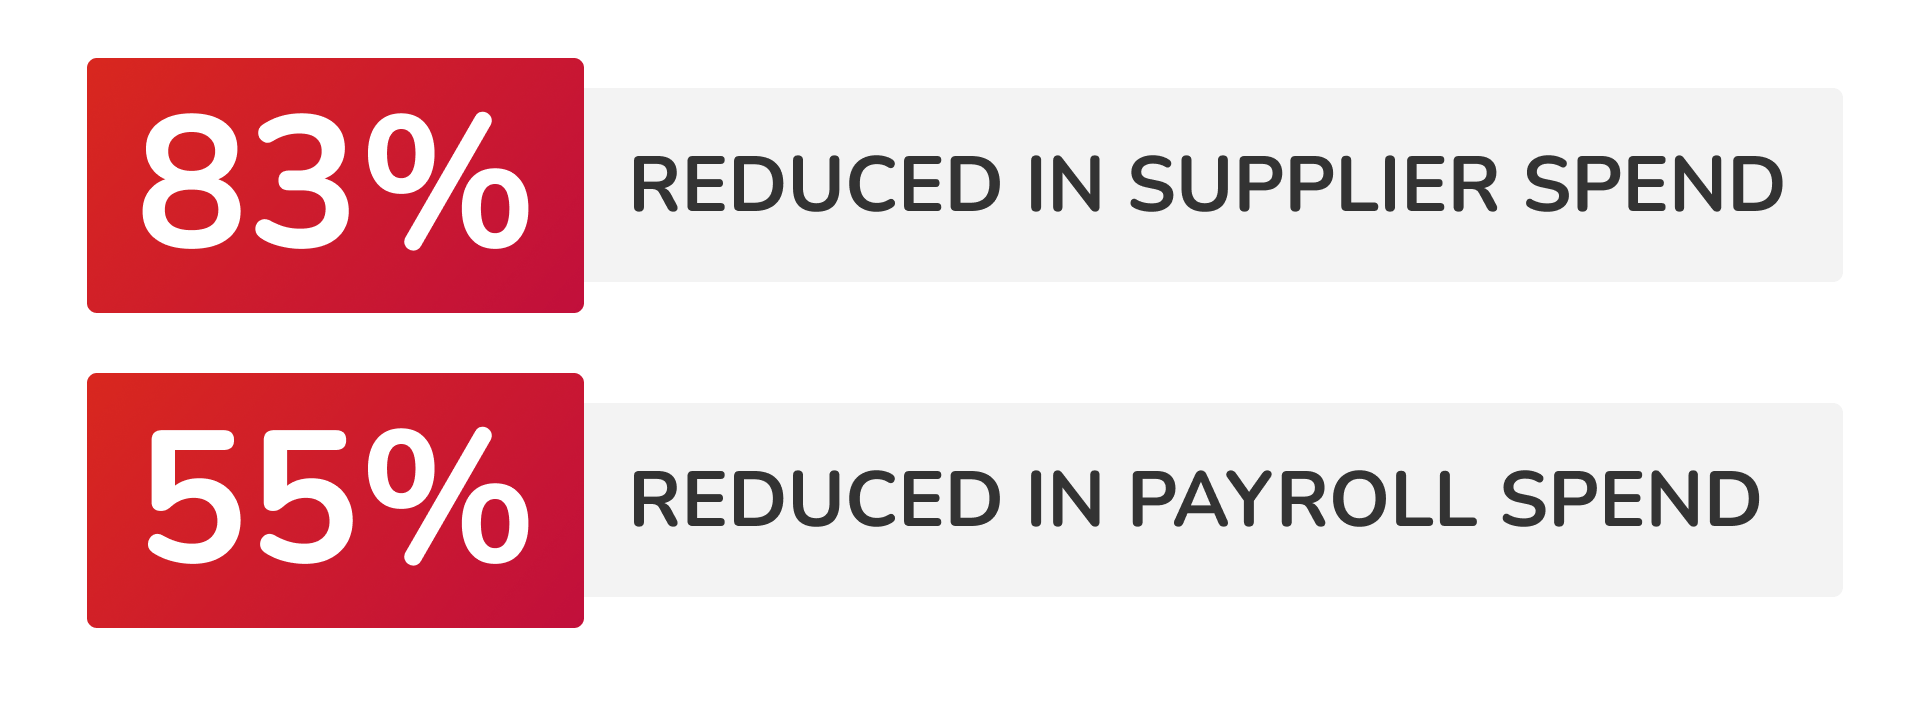 83% Reduced in supplier spend; 55% Reduced in payroll spend